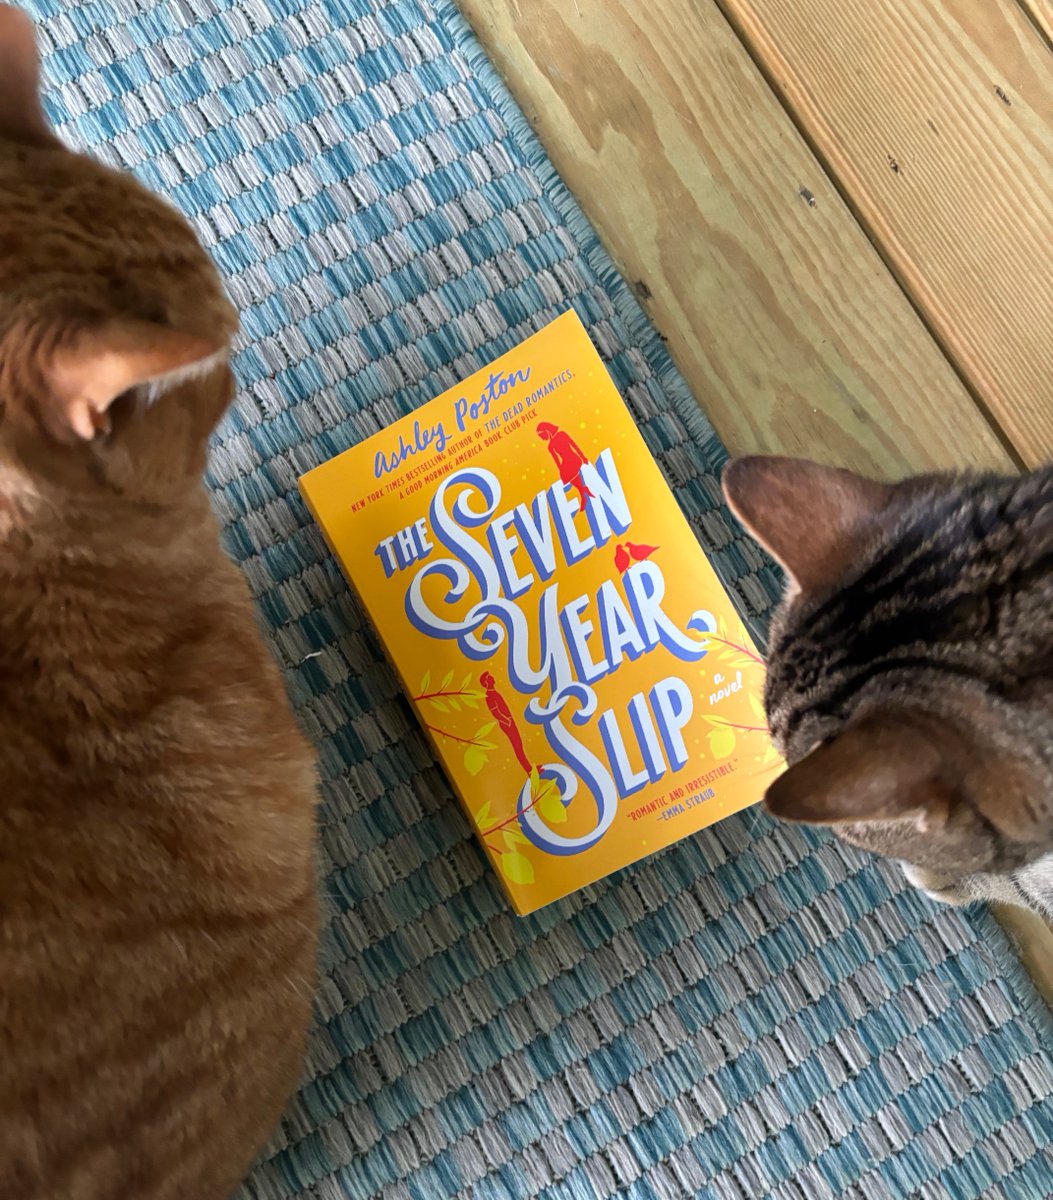 This #MeowMonday features The Seven Year Slip by Ashley Poston - a witty, time-bending rom-com from @ashposton! This follows a publicist who falls in love with a roommate... only to find that they are living seven years in the past. Have you read this one before?